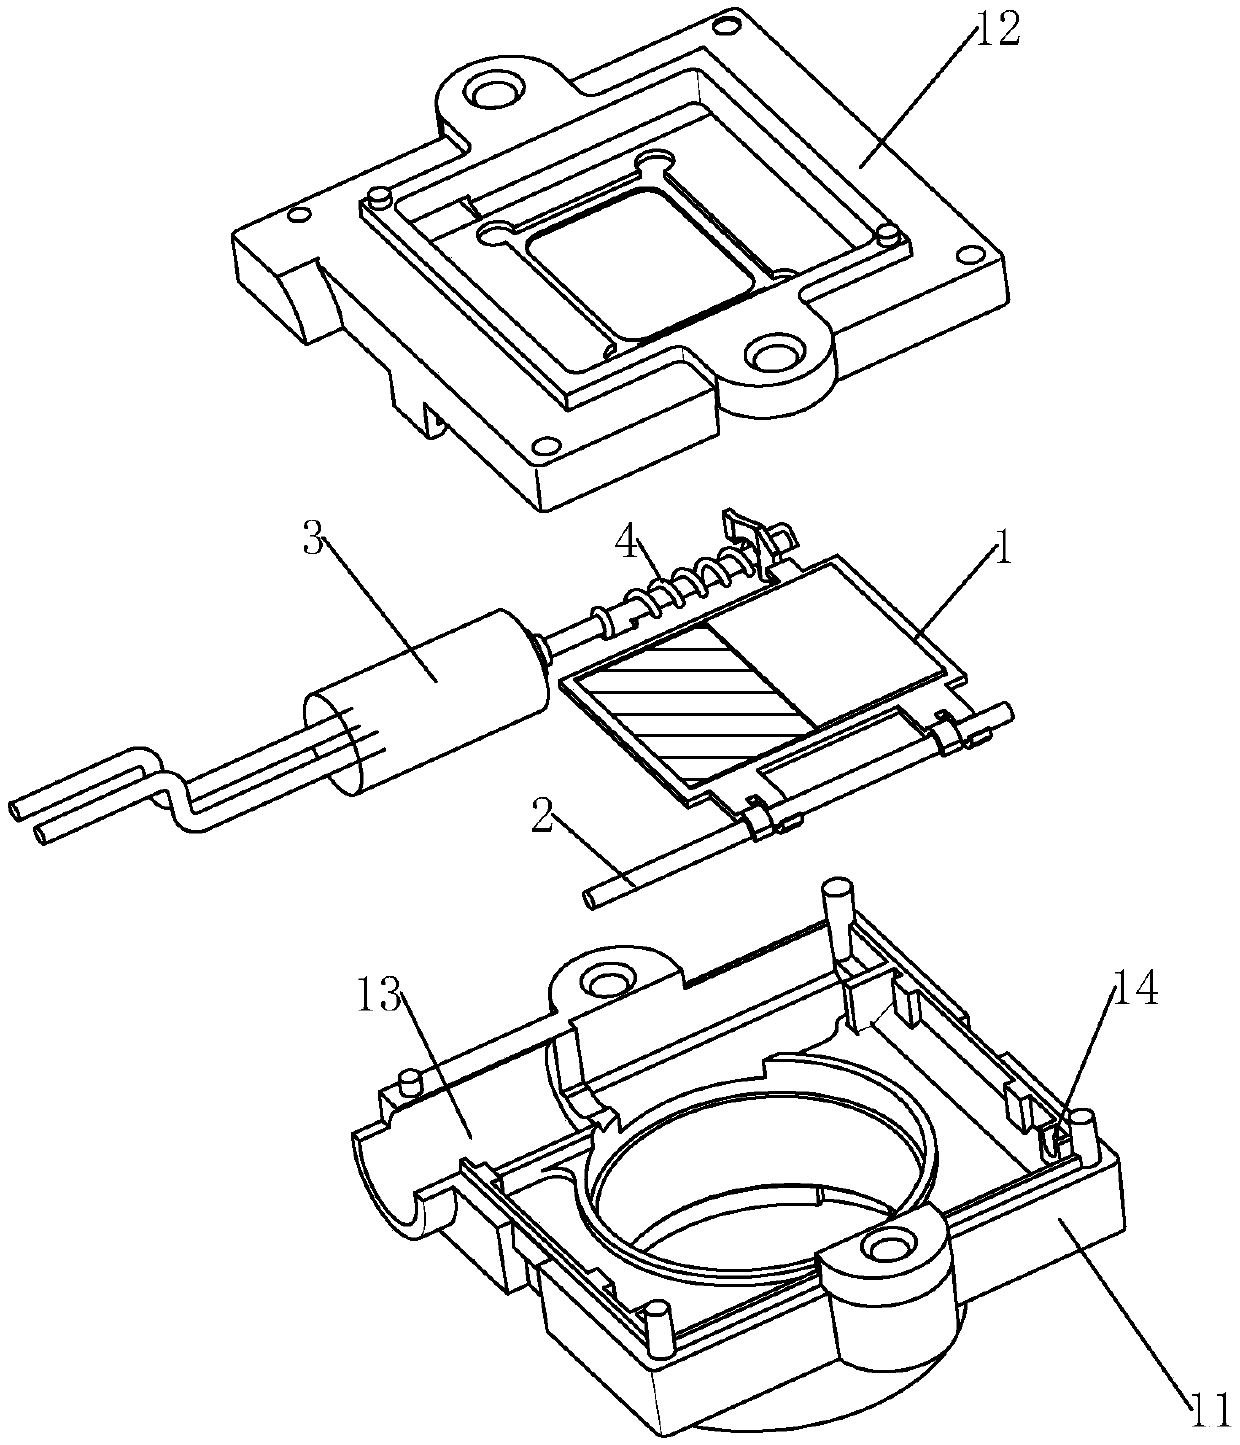 Dual-filter assembly and lens assembly